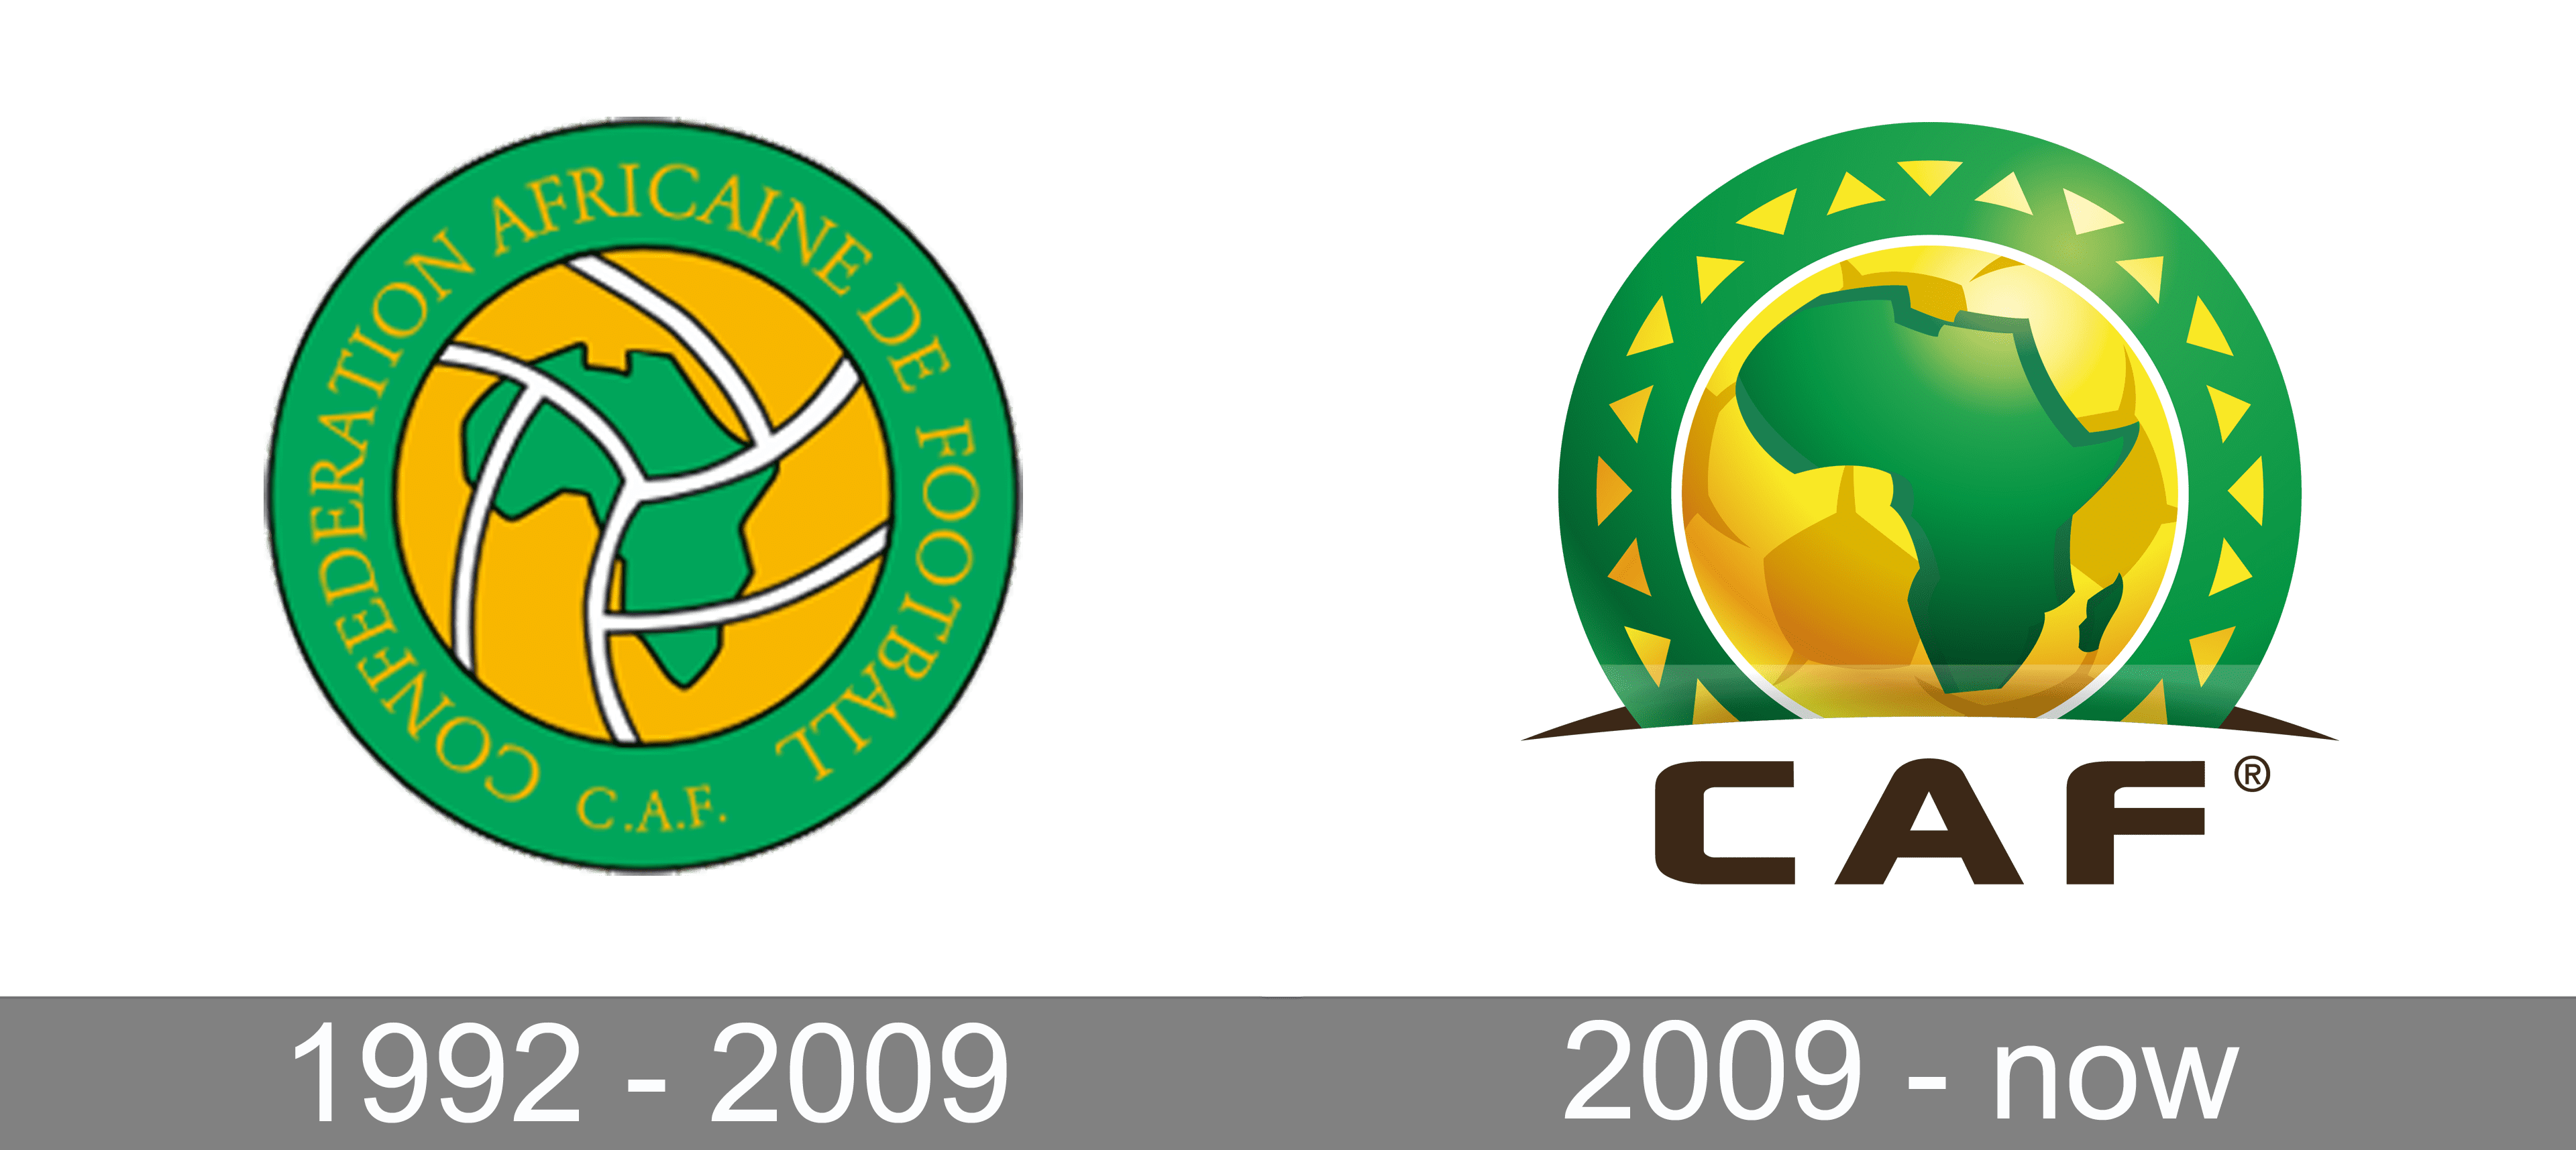 Confederation of African Football (CAF) logo and symbol, meaning